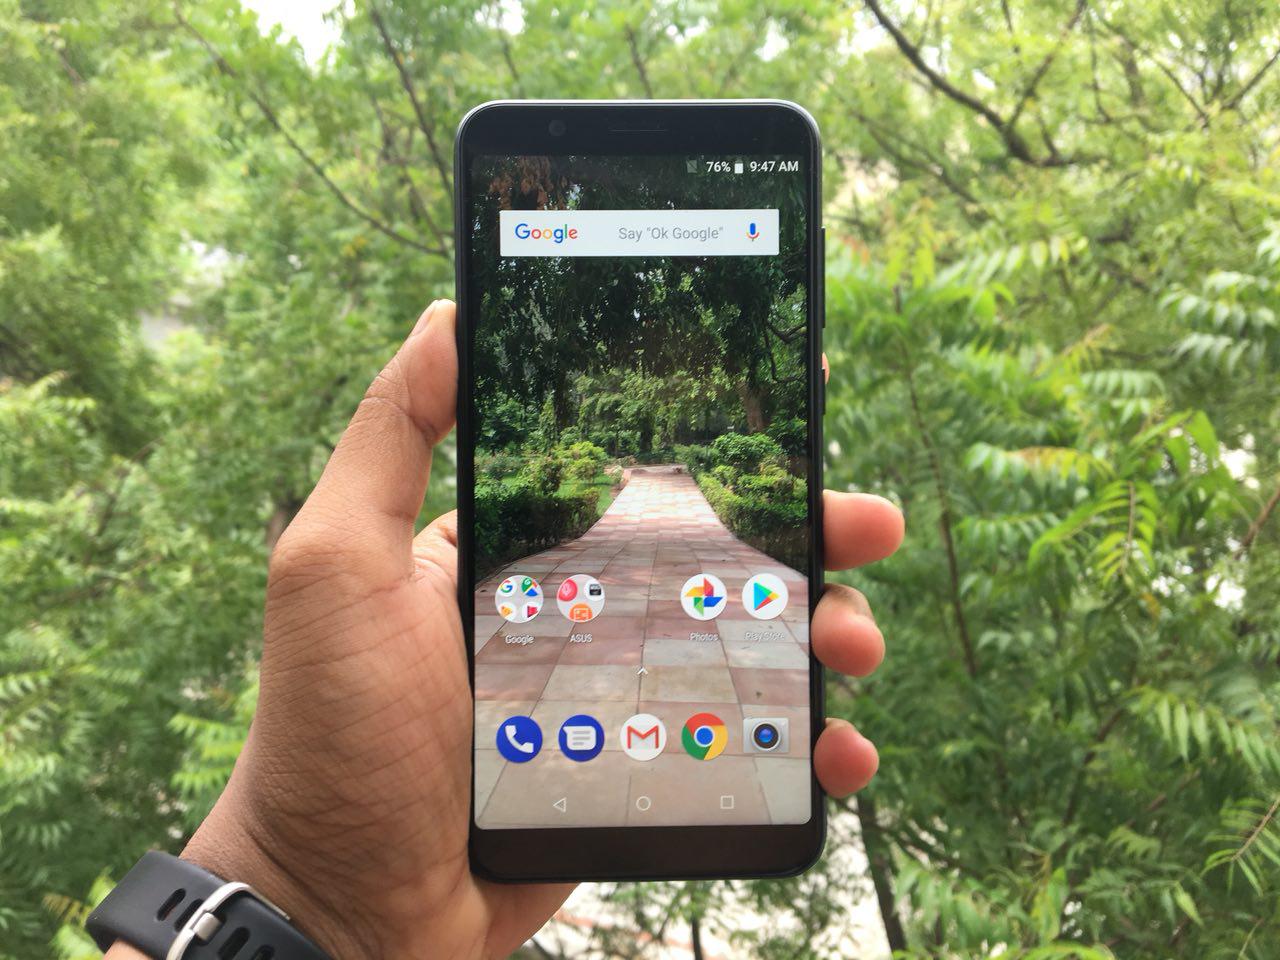 Asus Zenfone Max Pro M1 6GB variant launched on Flipkart at Rs 14,999